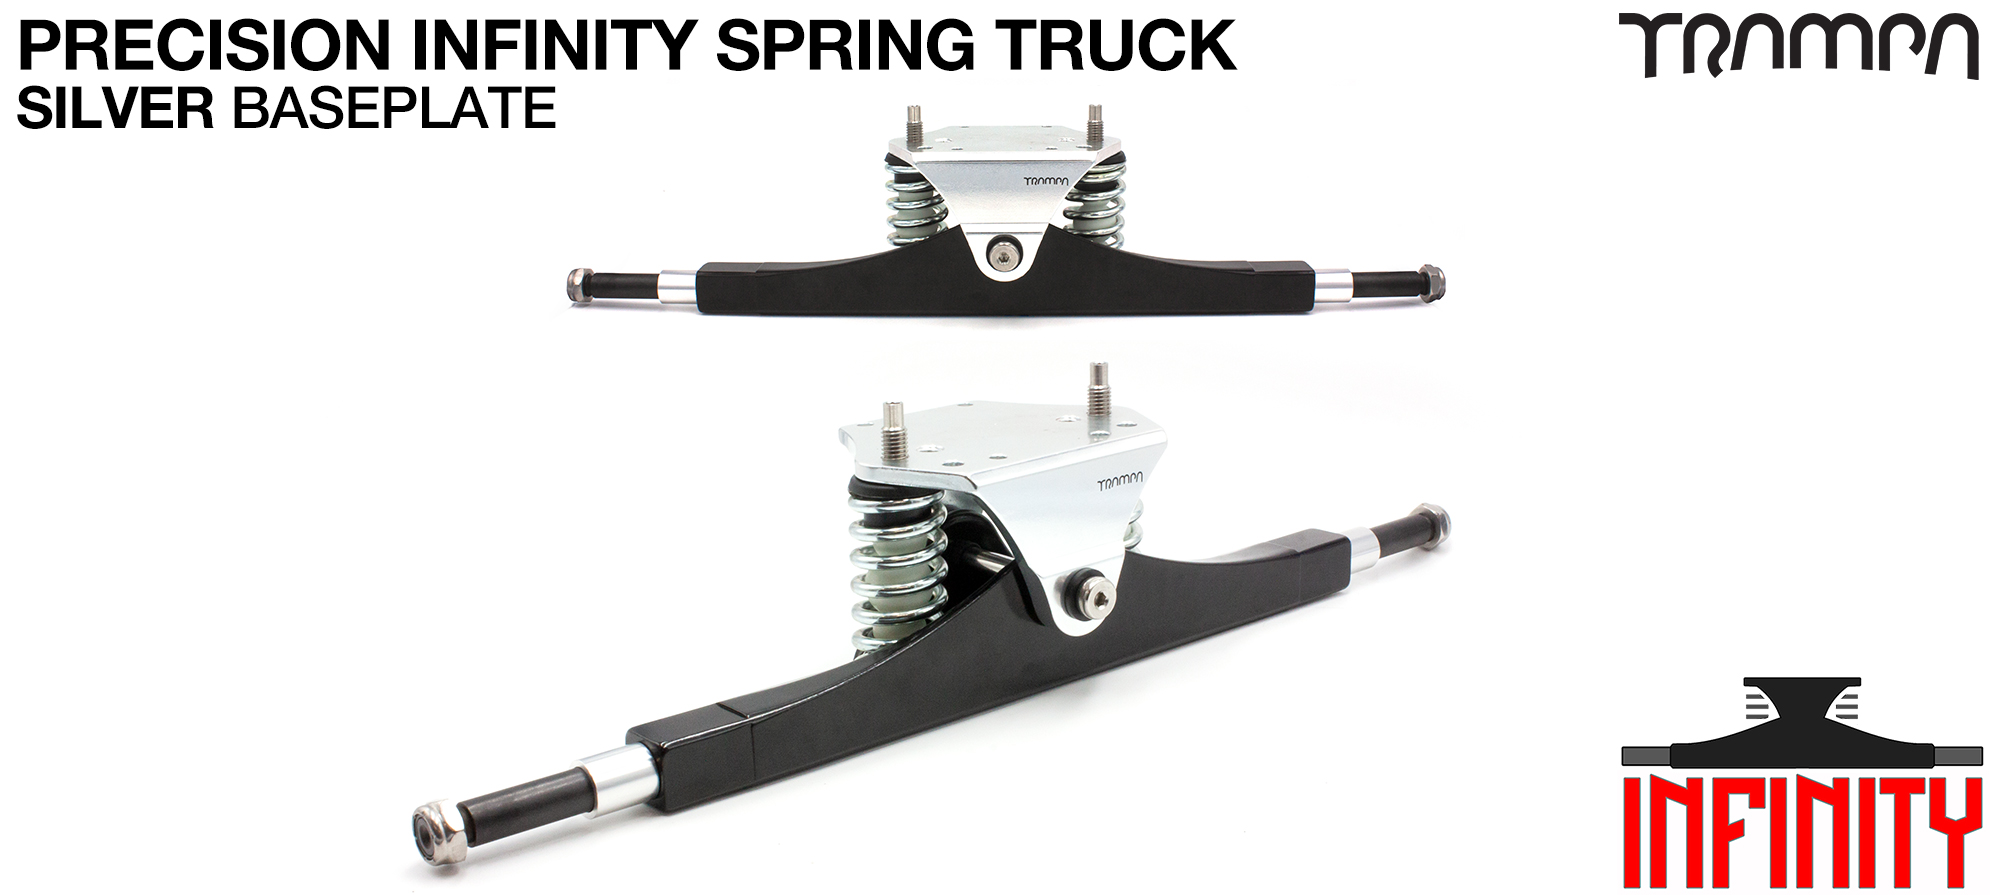 INFINITY CNC Precision Electric Mountainboard Truck  - 16 inch wide with 12mm SOLID Axles with Infinity Baseplate & Steel kingpin